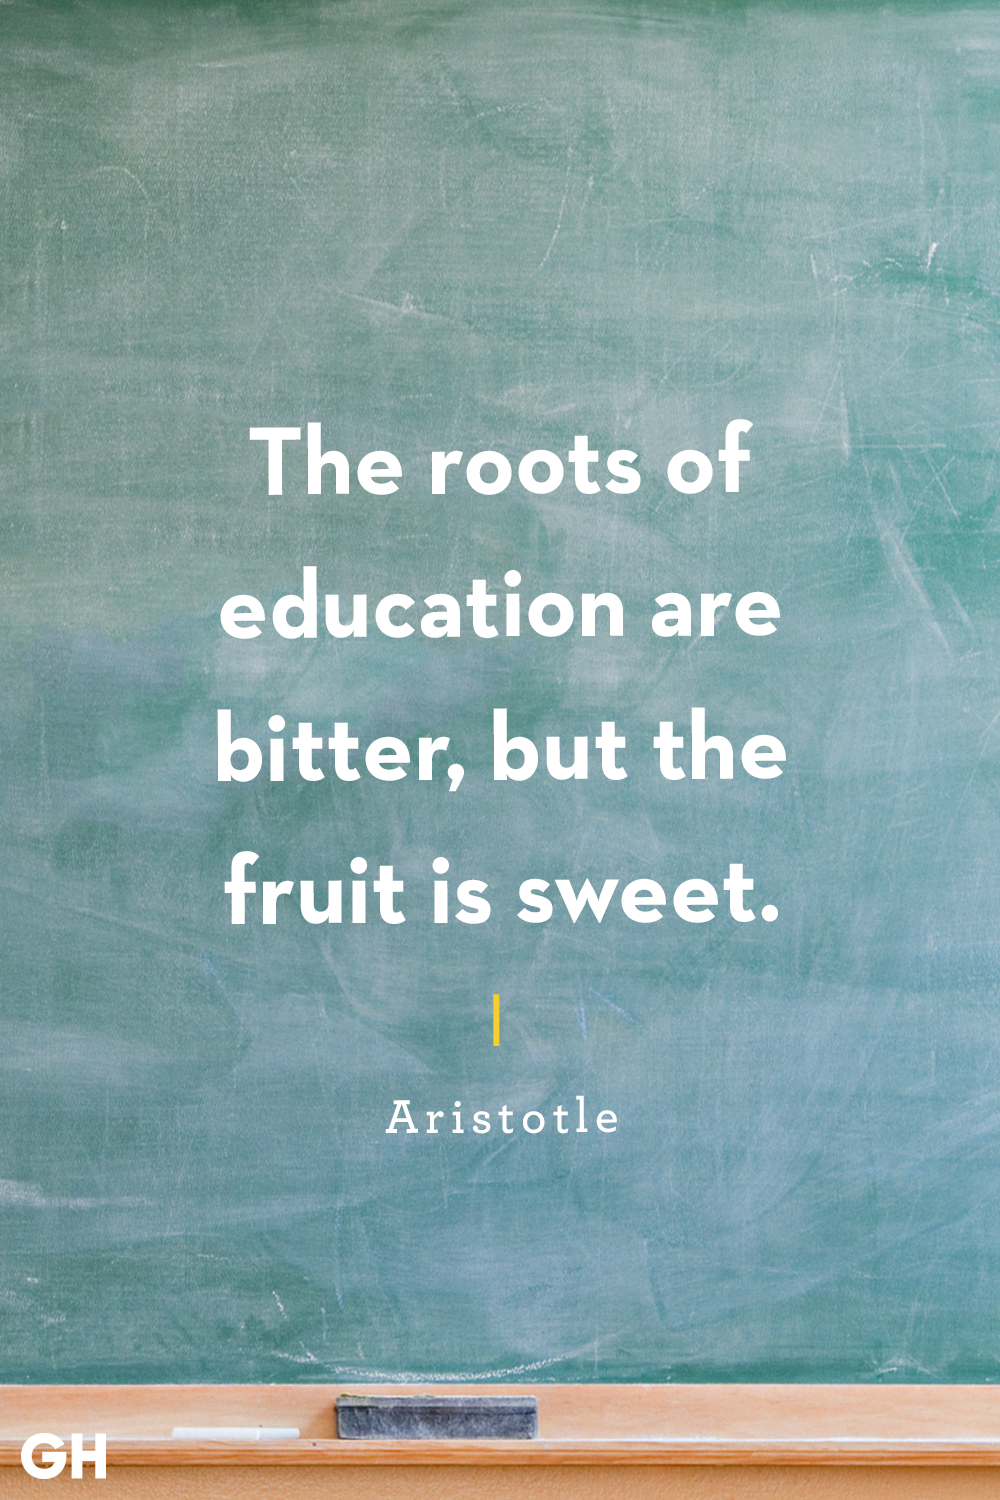 the roots of education are bitter but the fruitis sweet. aristotle